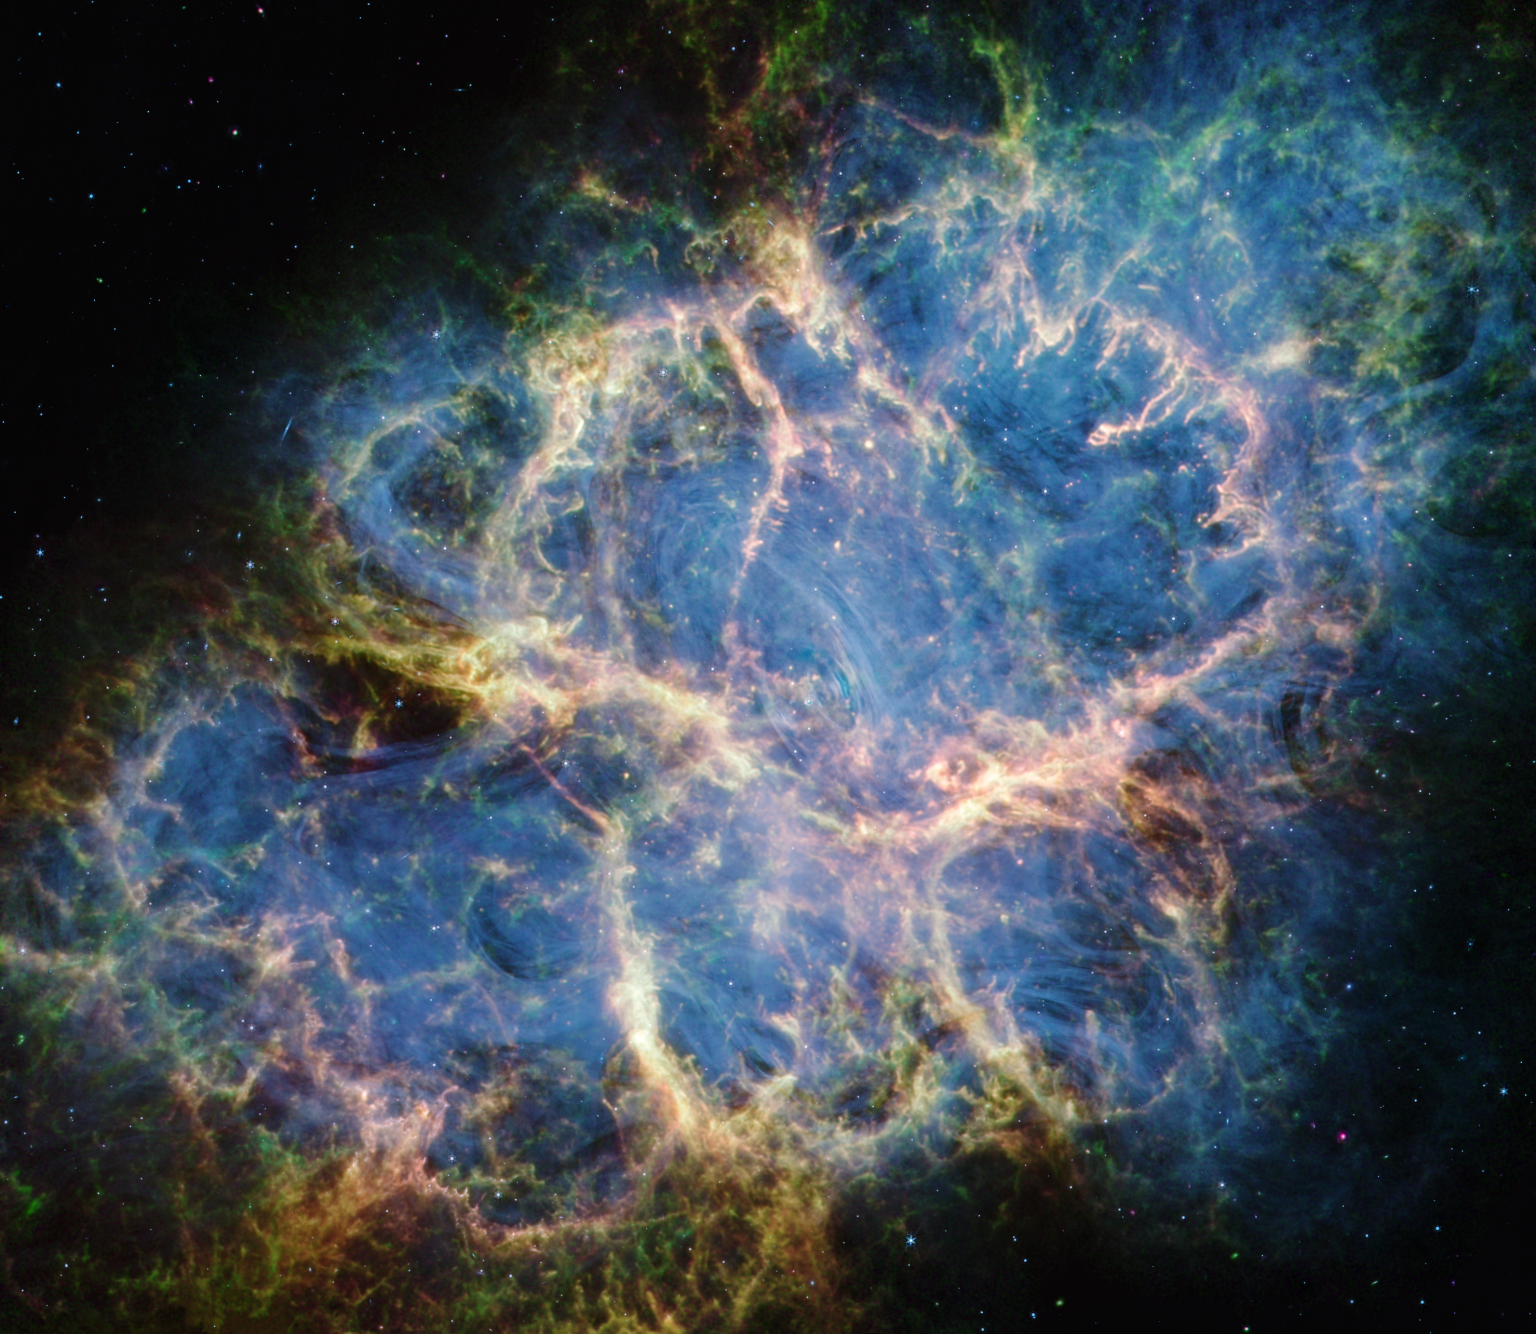 The Crab Nebula. An oval with complex structure extends from lower left to upper right against a black background. On the oval's exterior lie curtains of glowing yellow and green fluffy material. Its interior shell shows large-scale loops of mottled filaments of yellow-white and green, studded with clumps and knots. Translucent thin ribbons of smoky blue lie within the remnant's interior, brightest toward its center. The blue material follows different directions throughout, including sometimes sharply curving away from certain regions within the remnant. A faint, wispy ring of blue material encircles the very center of the nebula. Around and within the supernova remnant are many points of blue, green, purple, and white light.